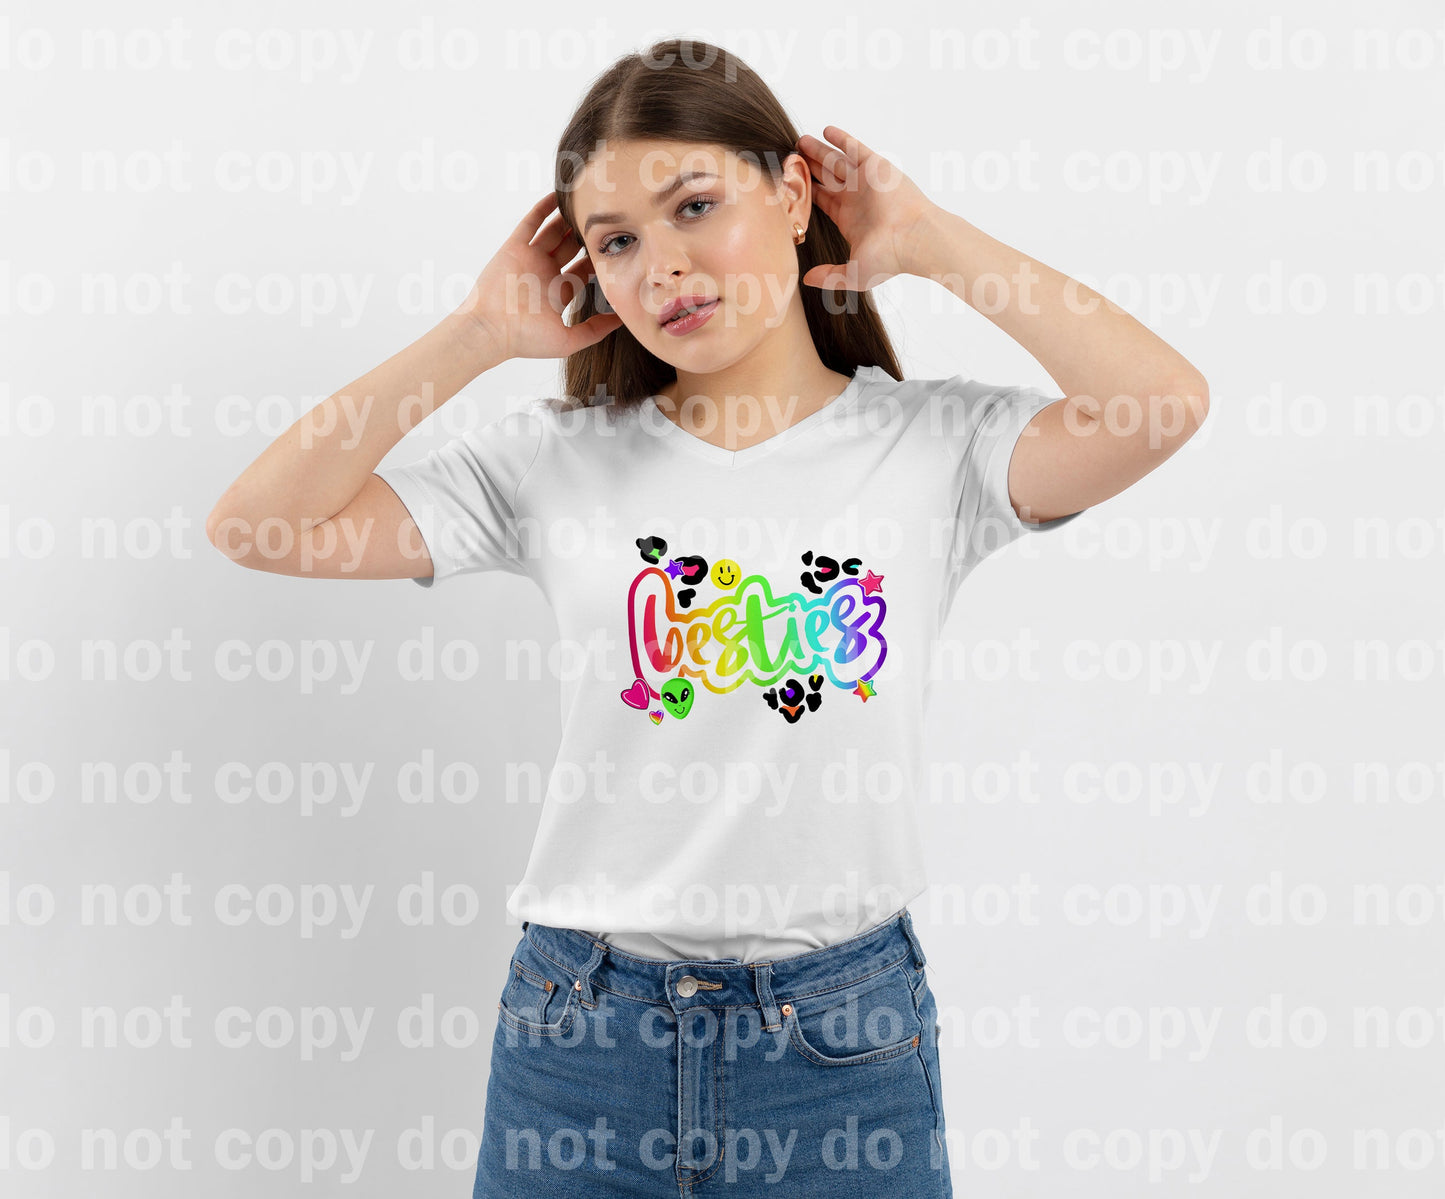 Besties 90's Sticker Inspired Dream Print or Sublimation Print